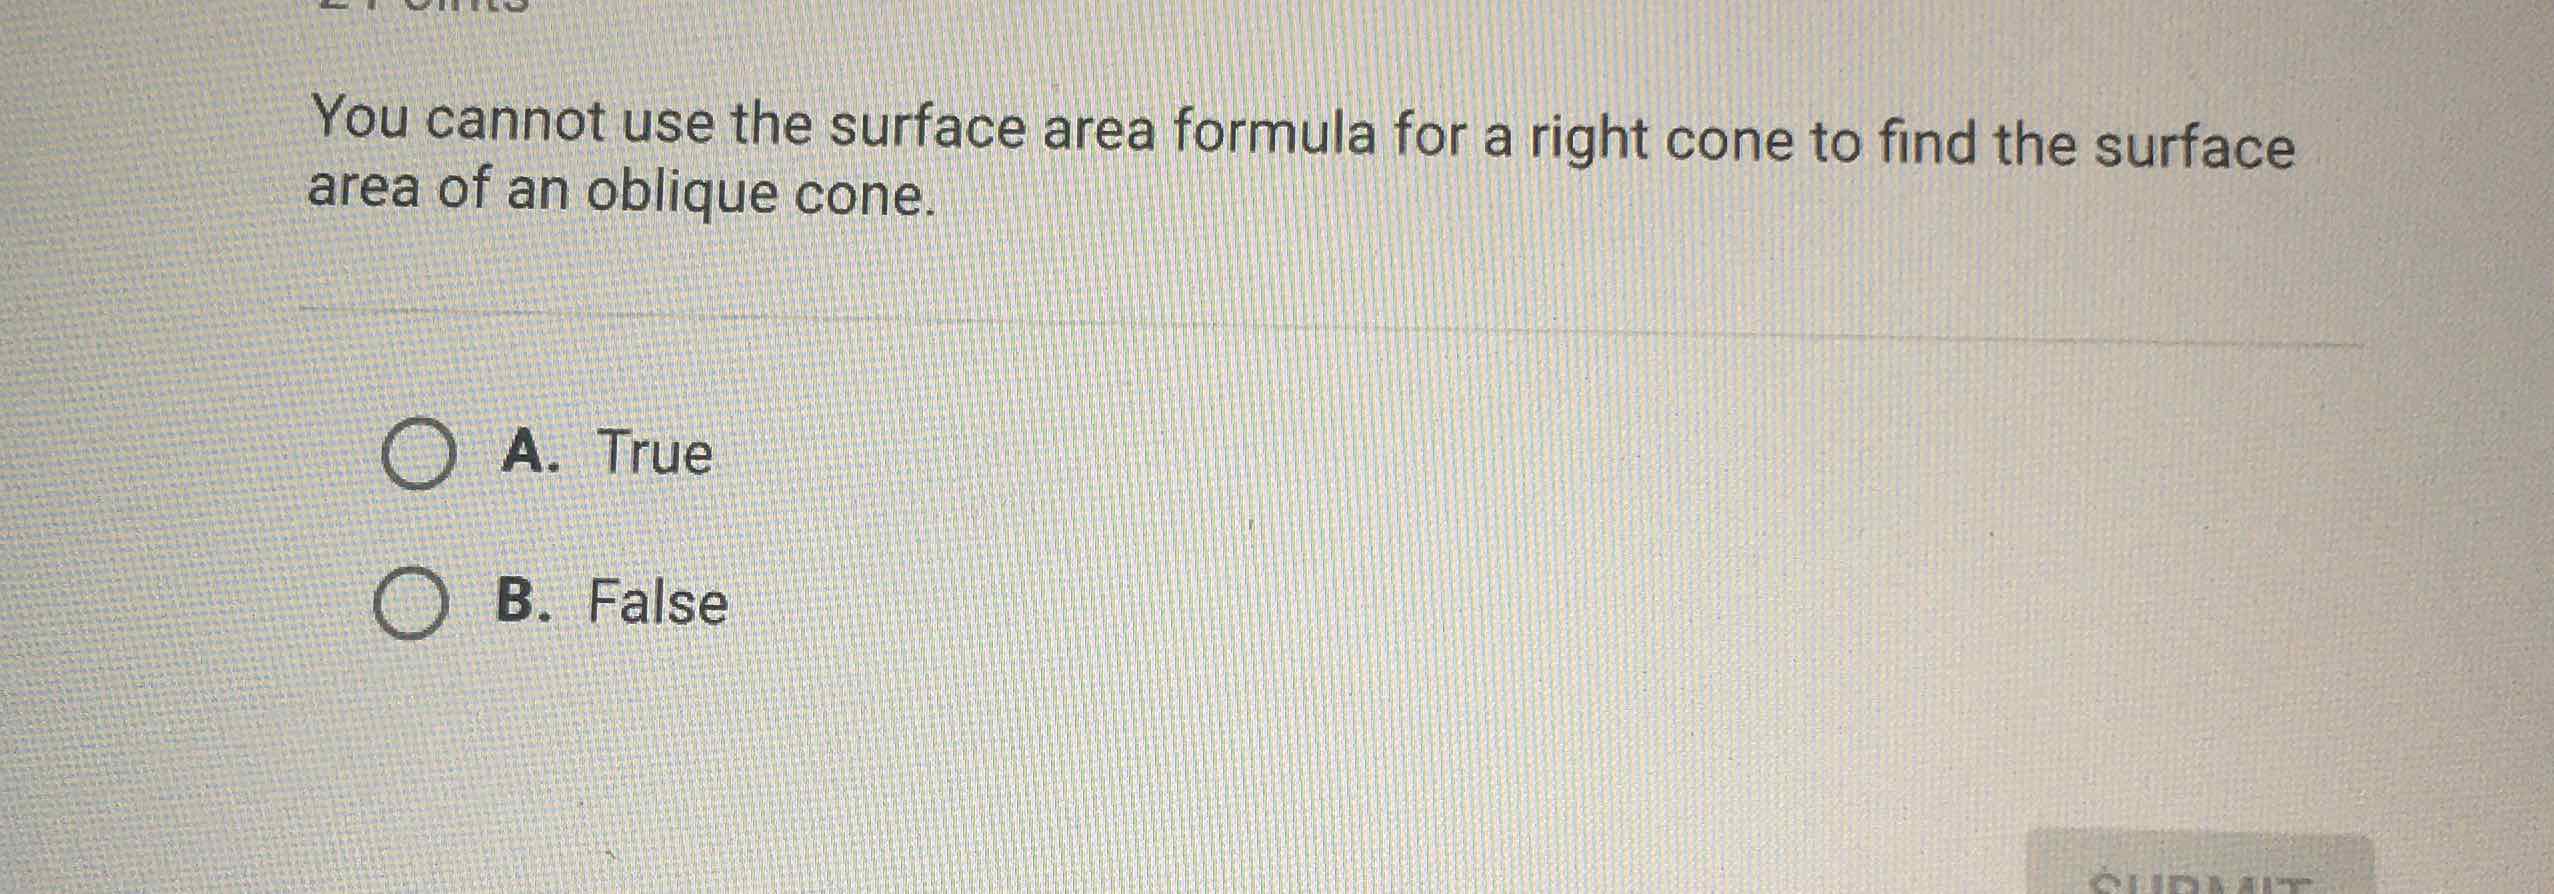 You cannot use the surface area formula for a right cone to find the surface area of an oblique cone.
A. True
B. False